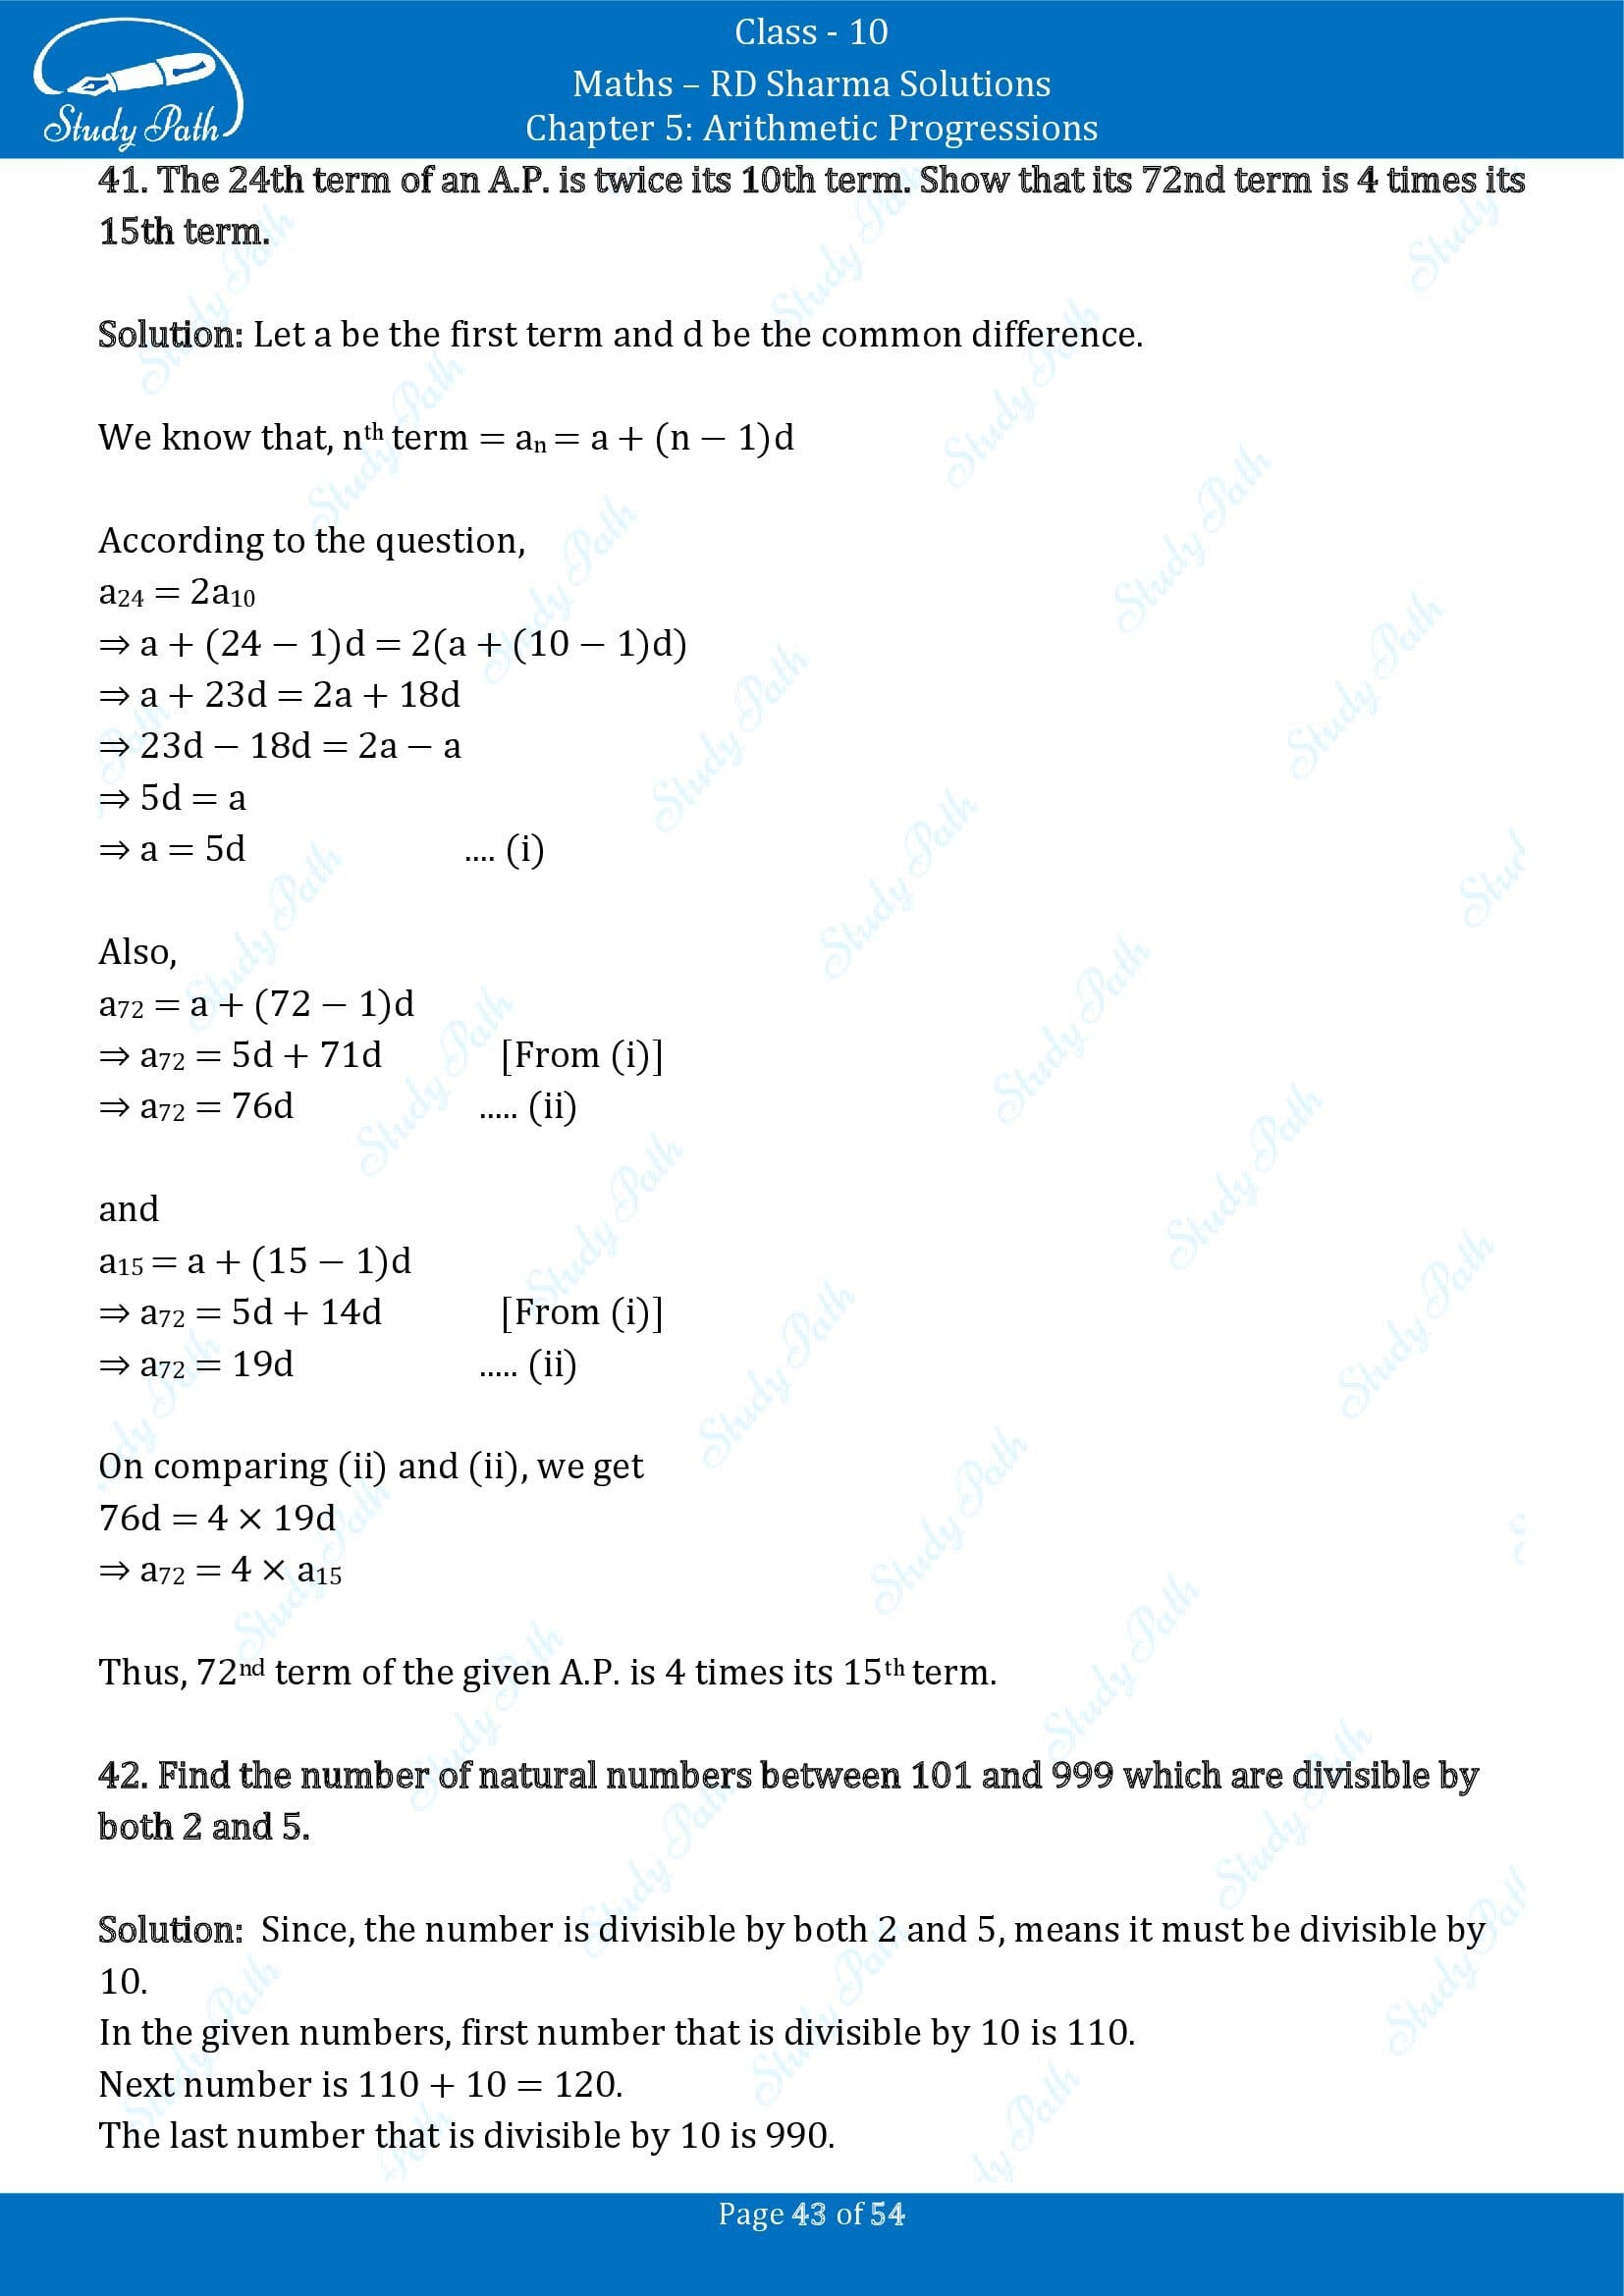 RD Sharma Solutions Class 10 Chapter 5 Arithmetic Progressions Exercise 5.4 00043